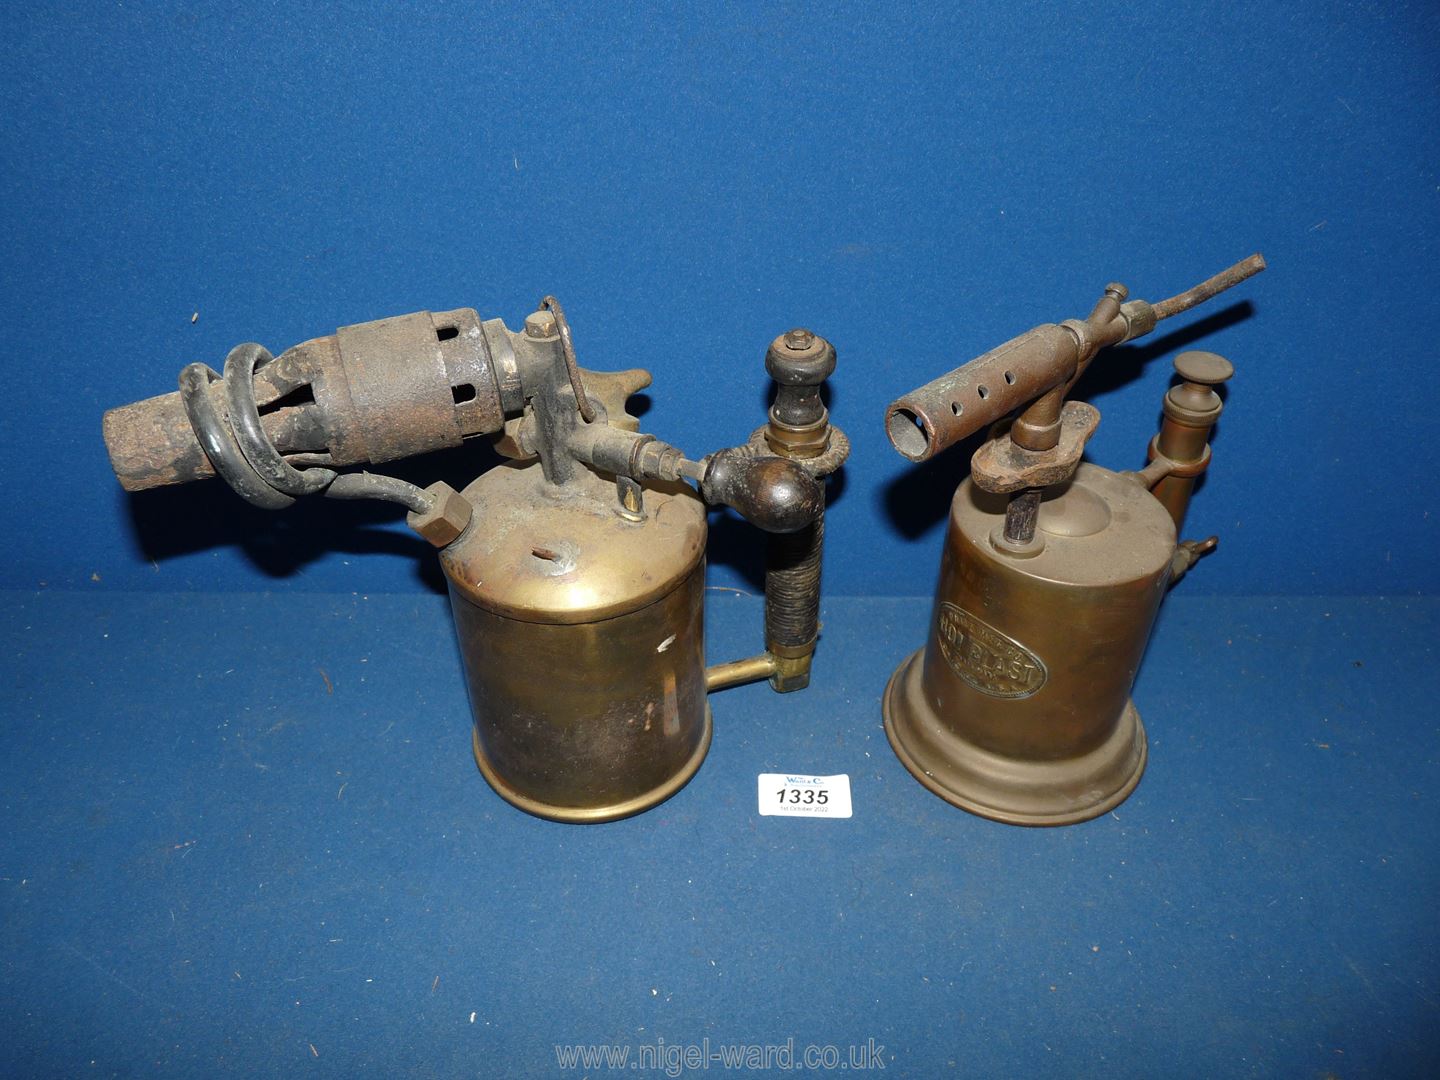 Two old Brass Blow lamps, one having a card-wrapped handle, the other "Hot Blast-Whie Mfg Co,